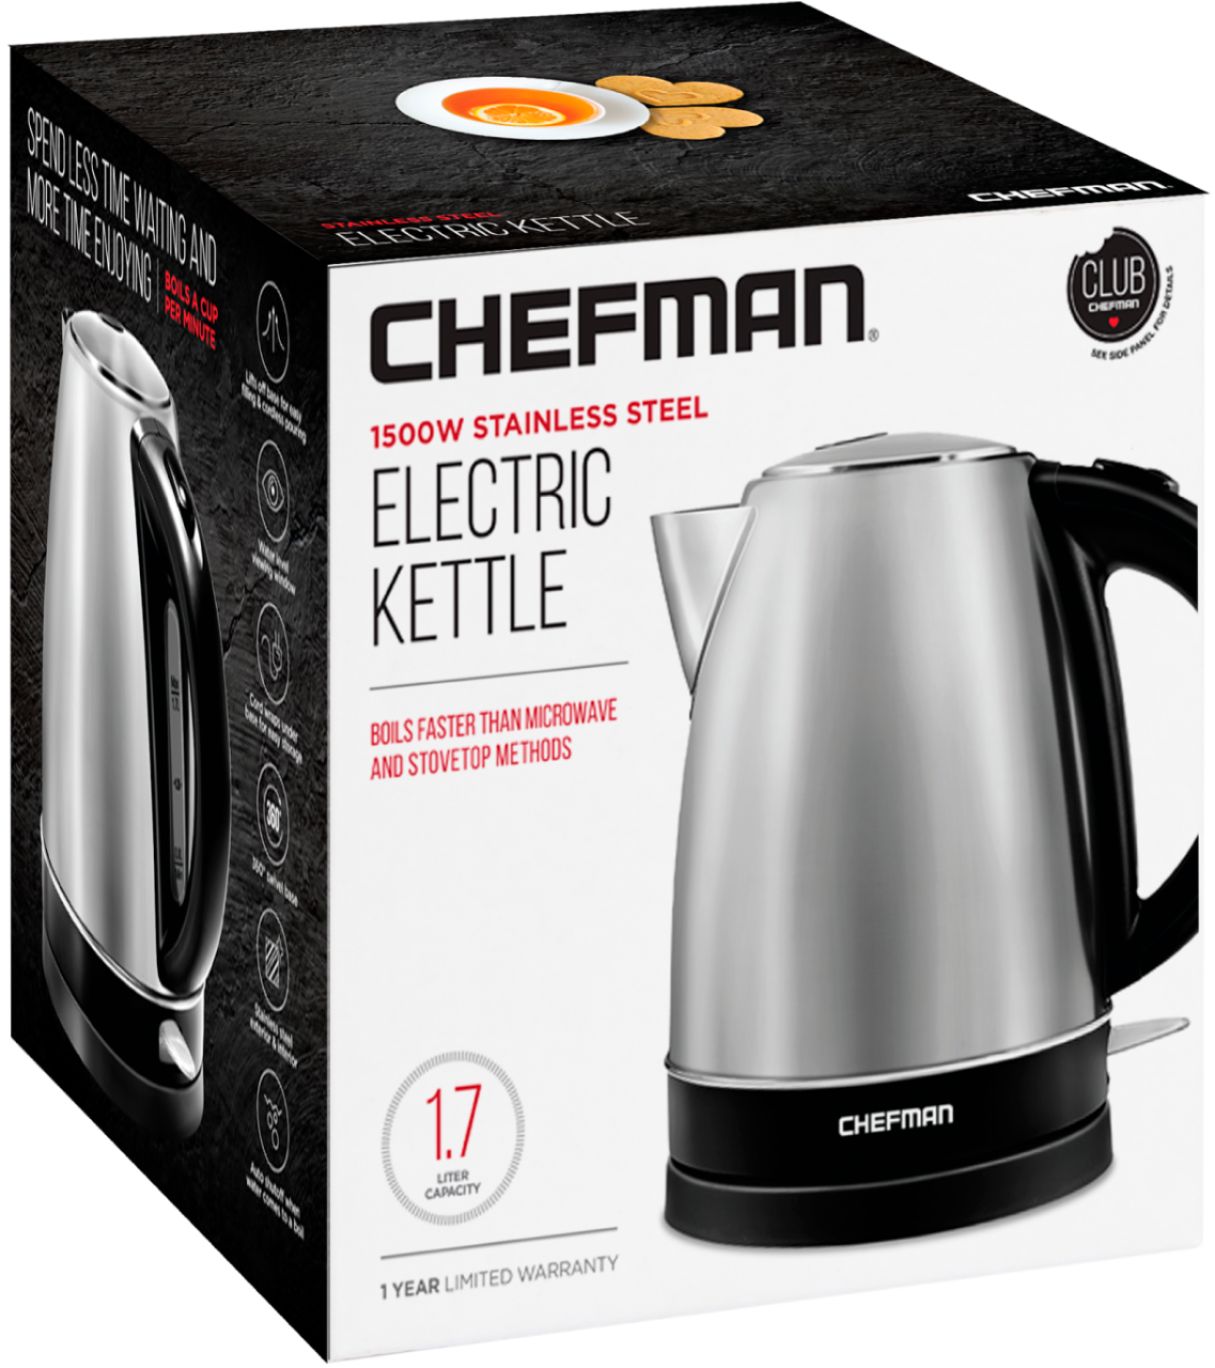 DASH MINI RICE COOKER & CHEFMAN ELECTRIC KETTLE IN BOXES - Earl's